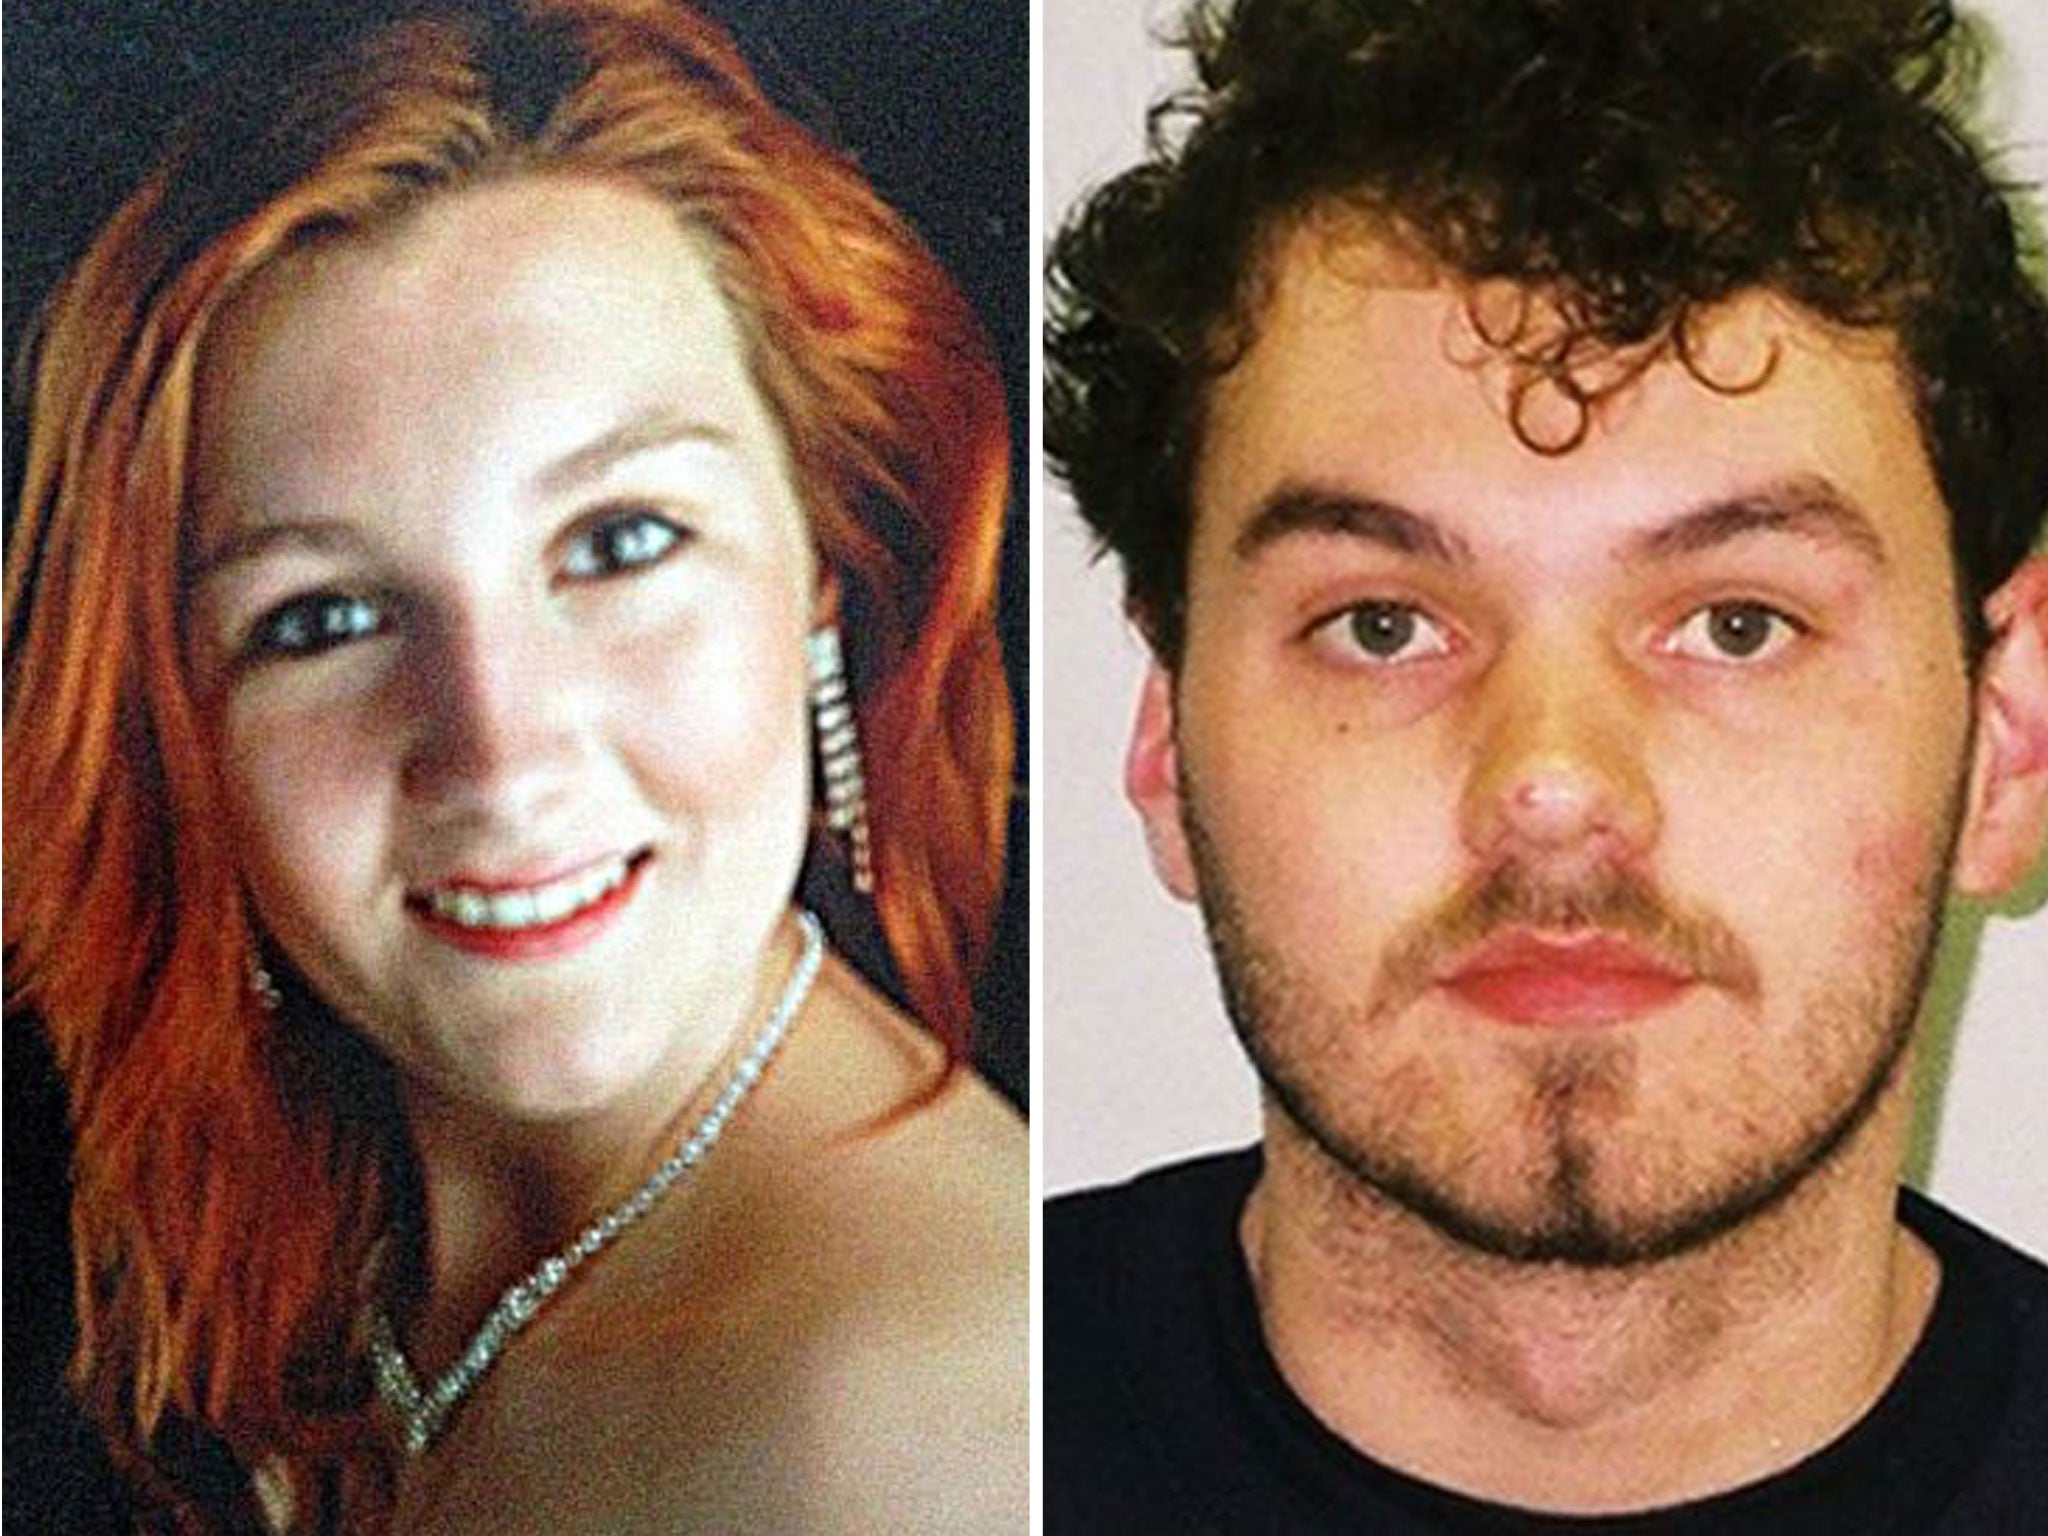 Porn On The Internet Played Real Part In Gruesome Real Life Murder Of Georgia Williams Claims